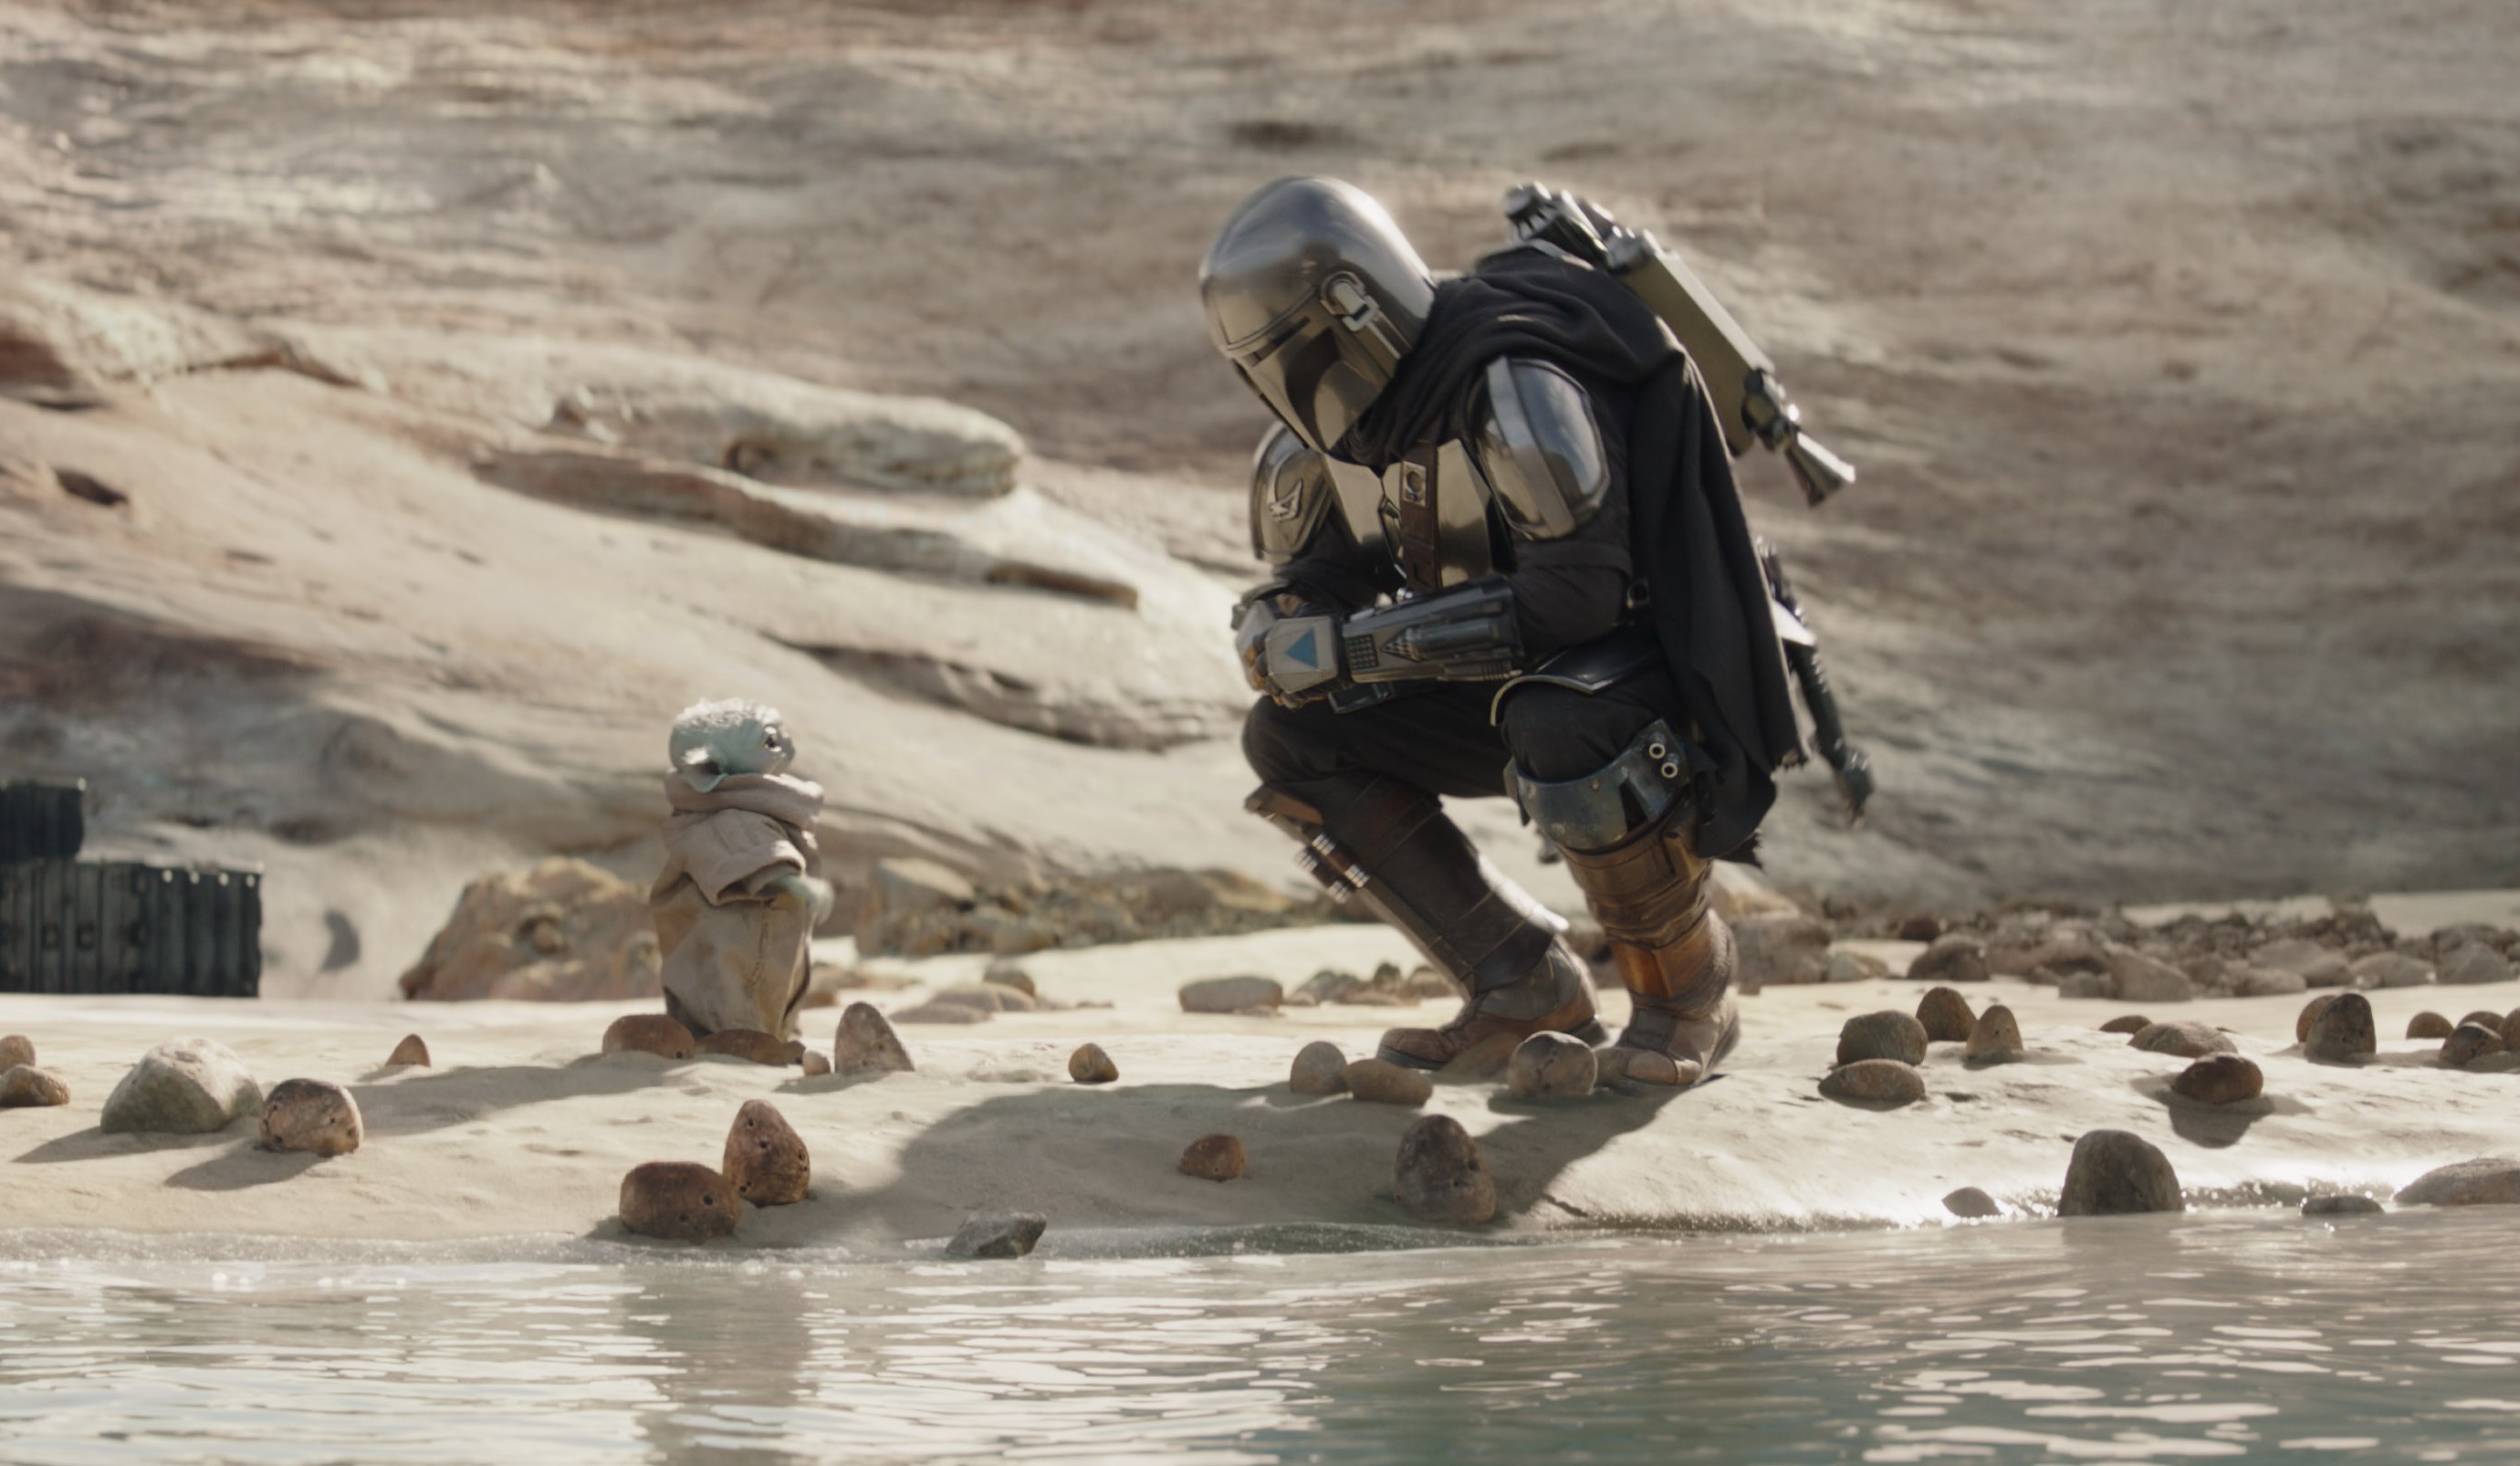 The Mandalorian 3x04 Review: “The Foundling”